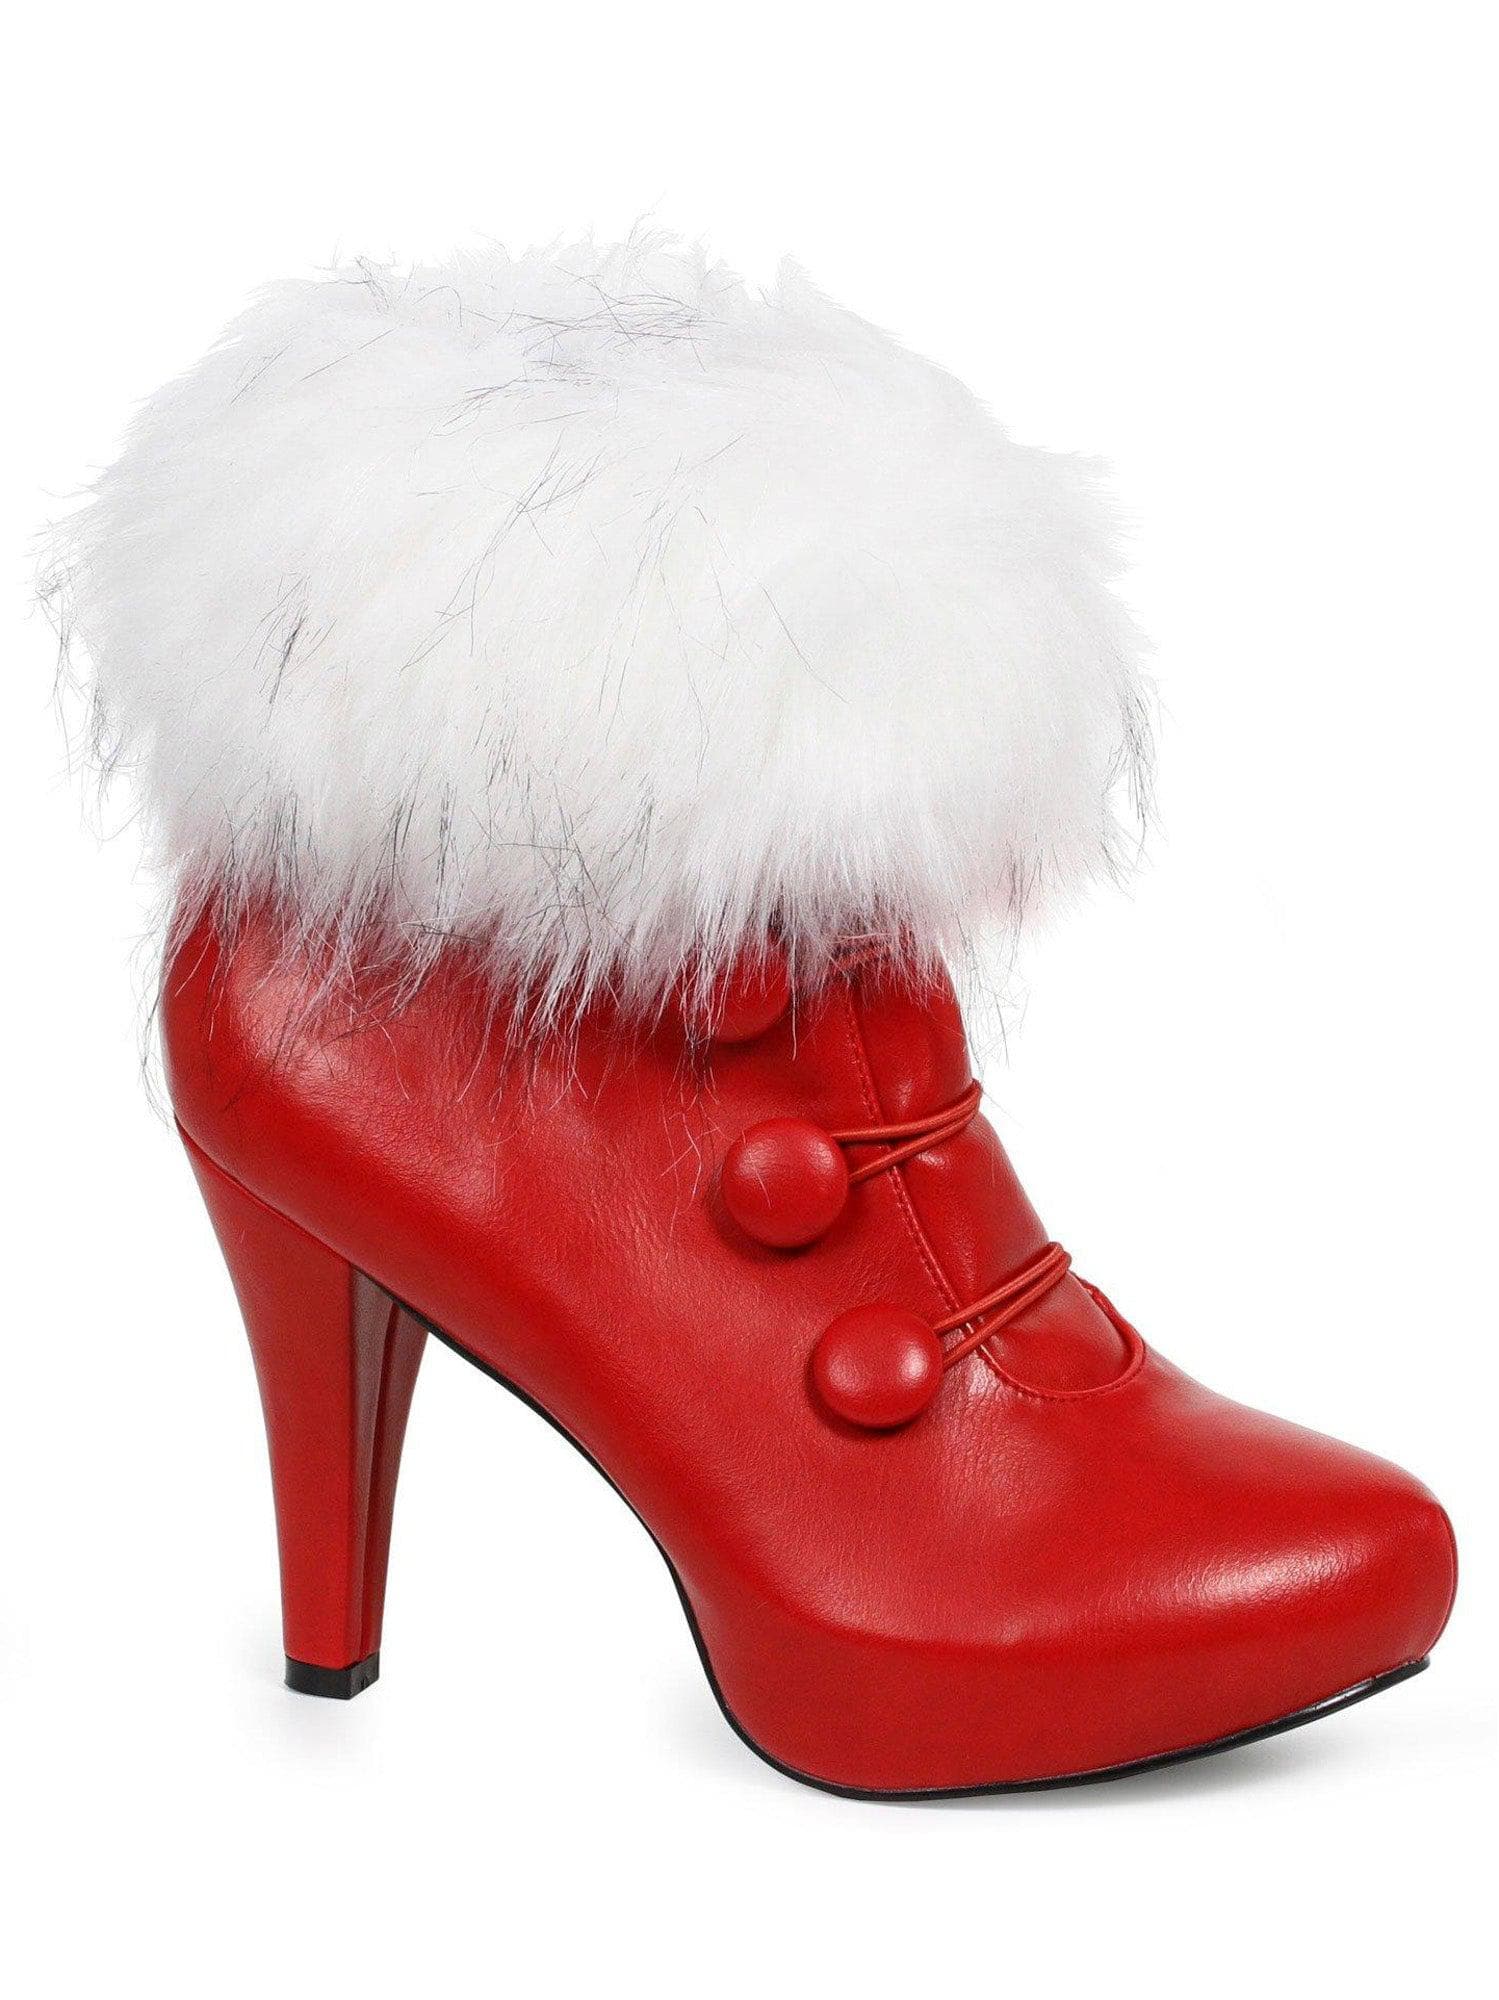 Adult Red Ankle Boots with Faux Fur - costumes.com